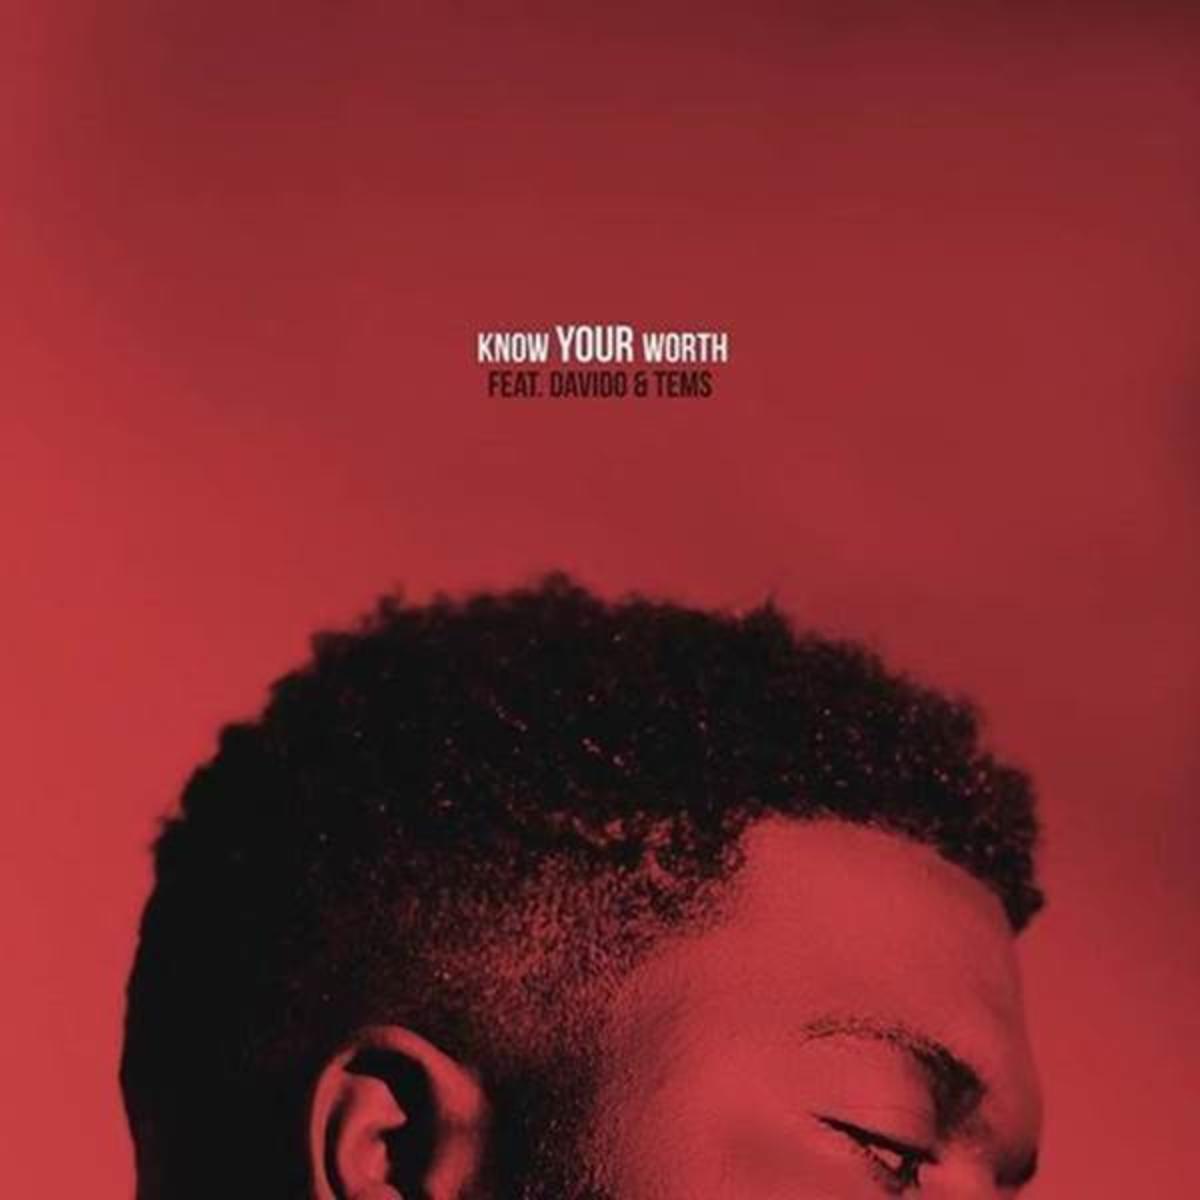 Khalid & Disclosure Add Davido & Tems To “Know Your Worth”